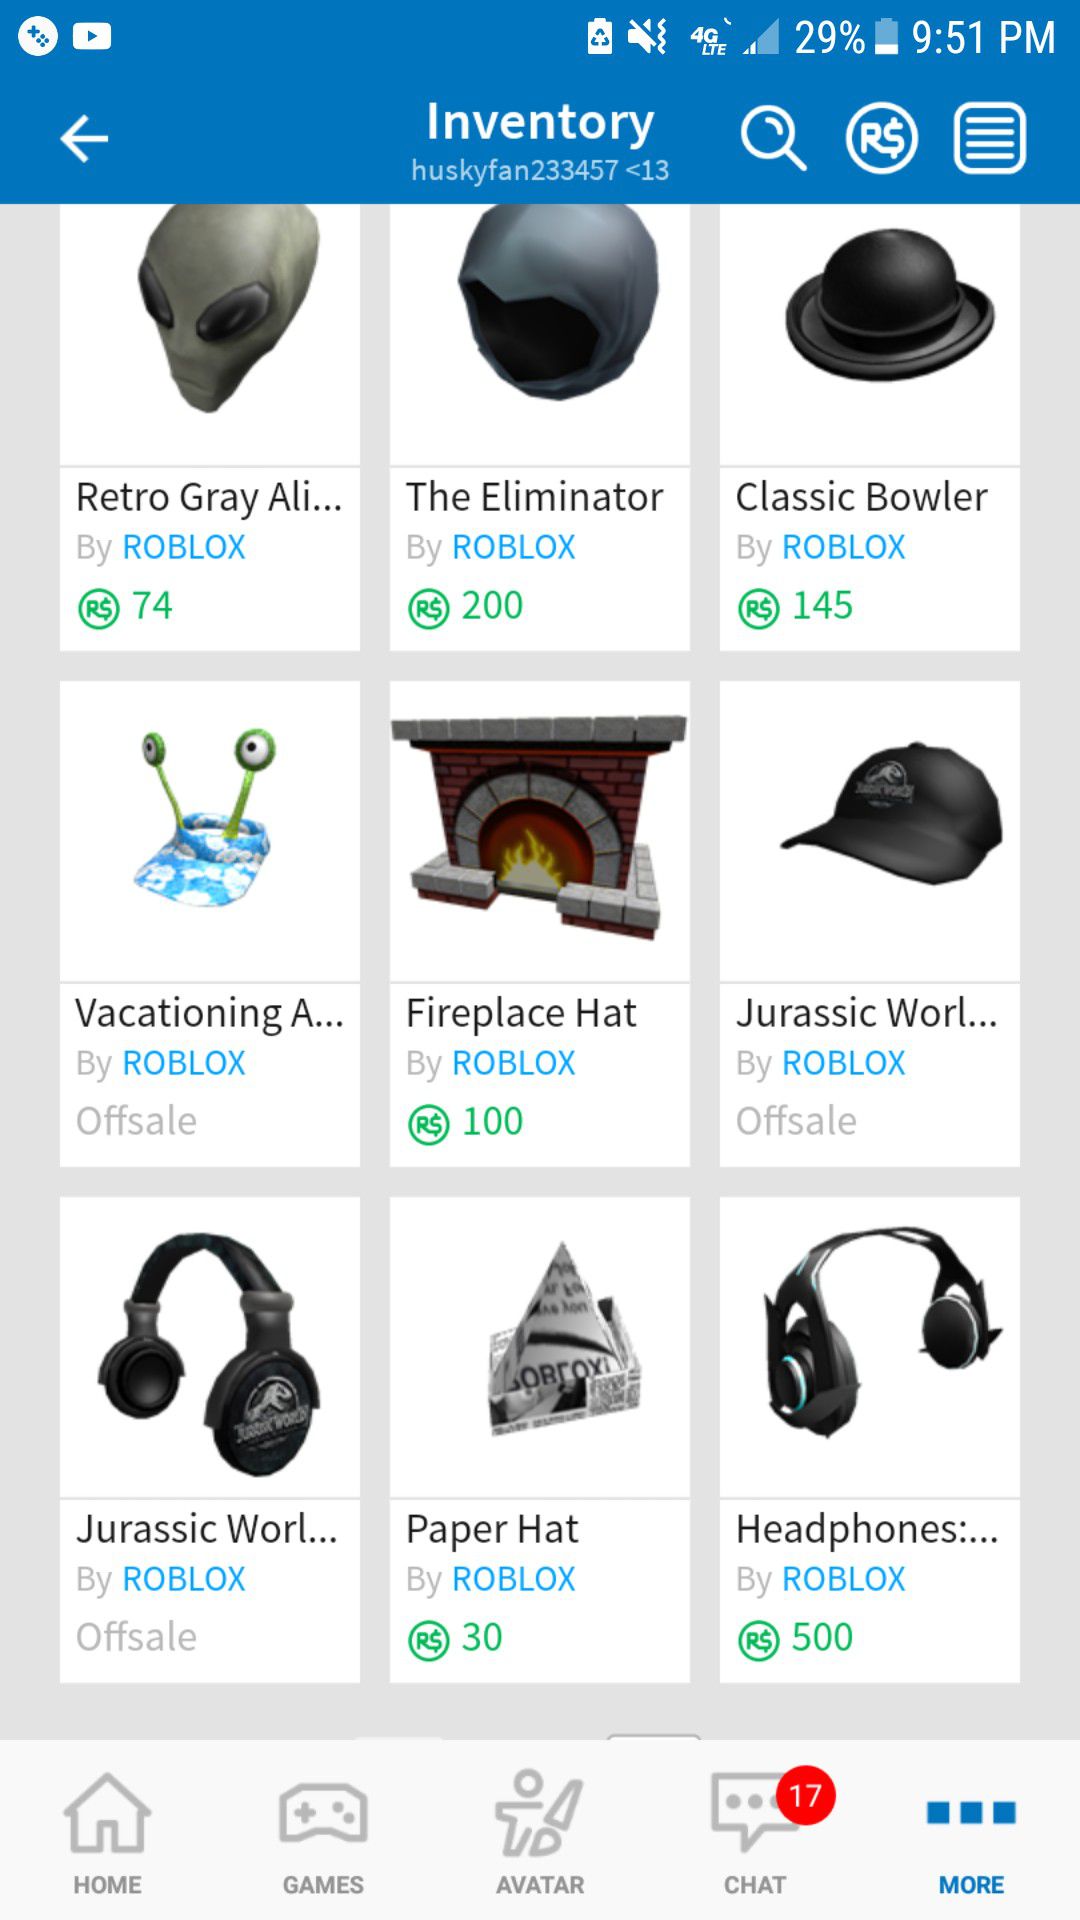 Roblox Account 2017 For Sale In Santa Clara Ca Offerup - roblox how to see offsale audios